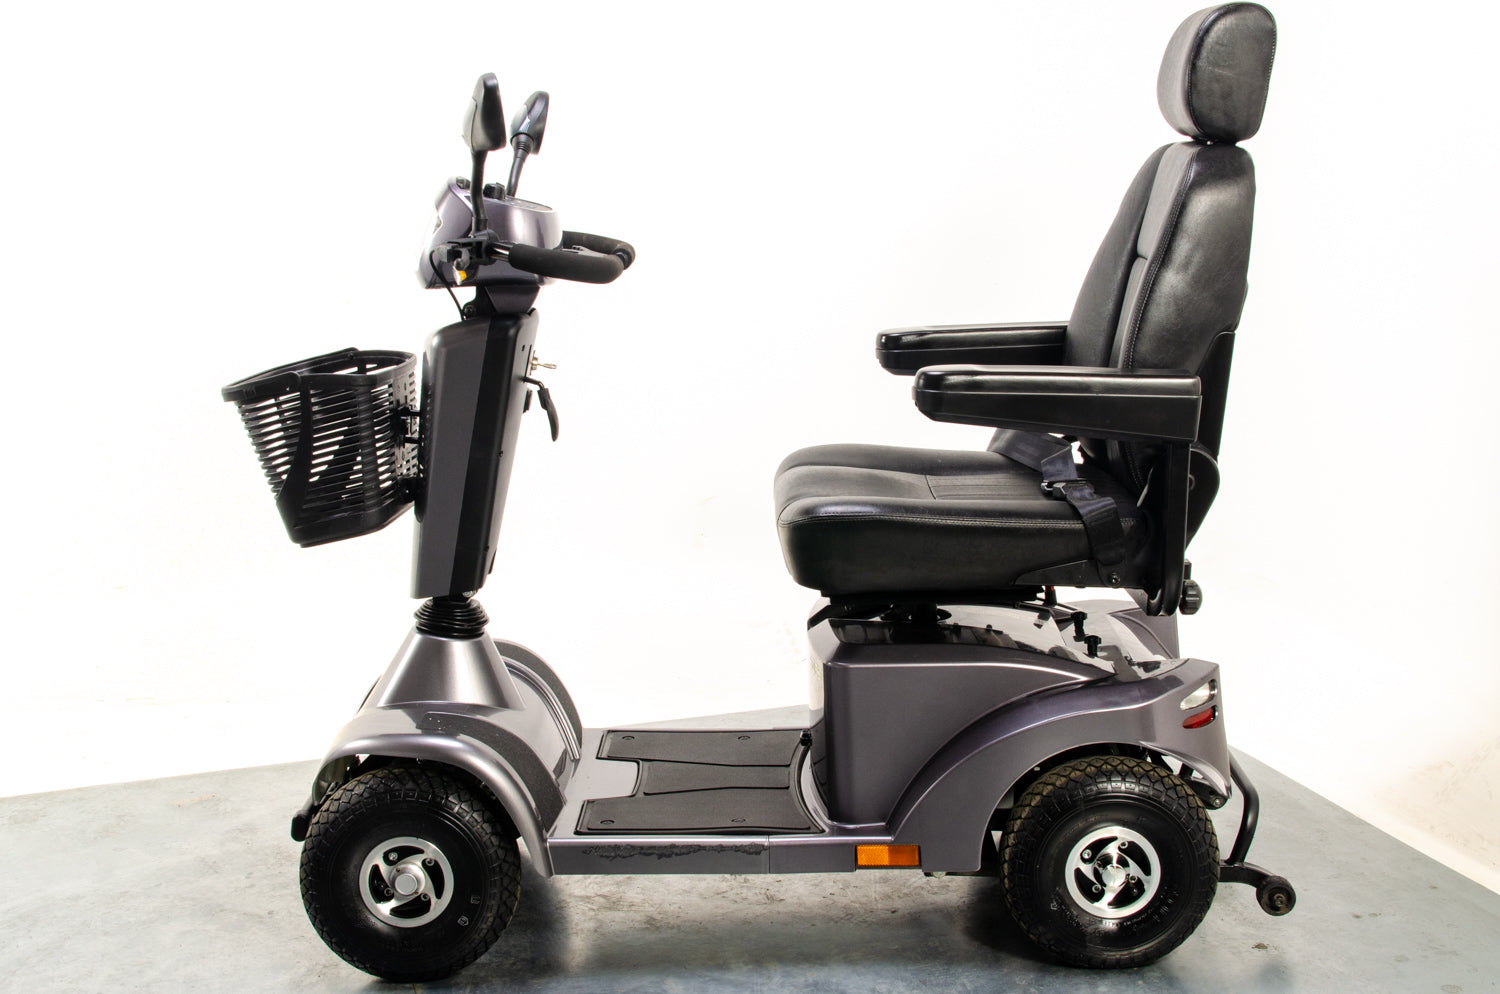 Sterling S425 Used Mobility Scooter 8mph All-Terrain Pneumatic Pavement Sunrise Medical Grey Midsize 13068